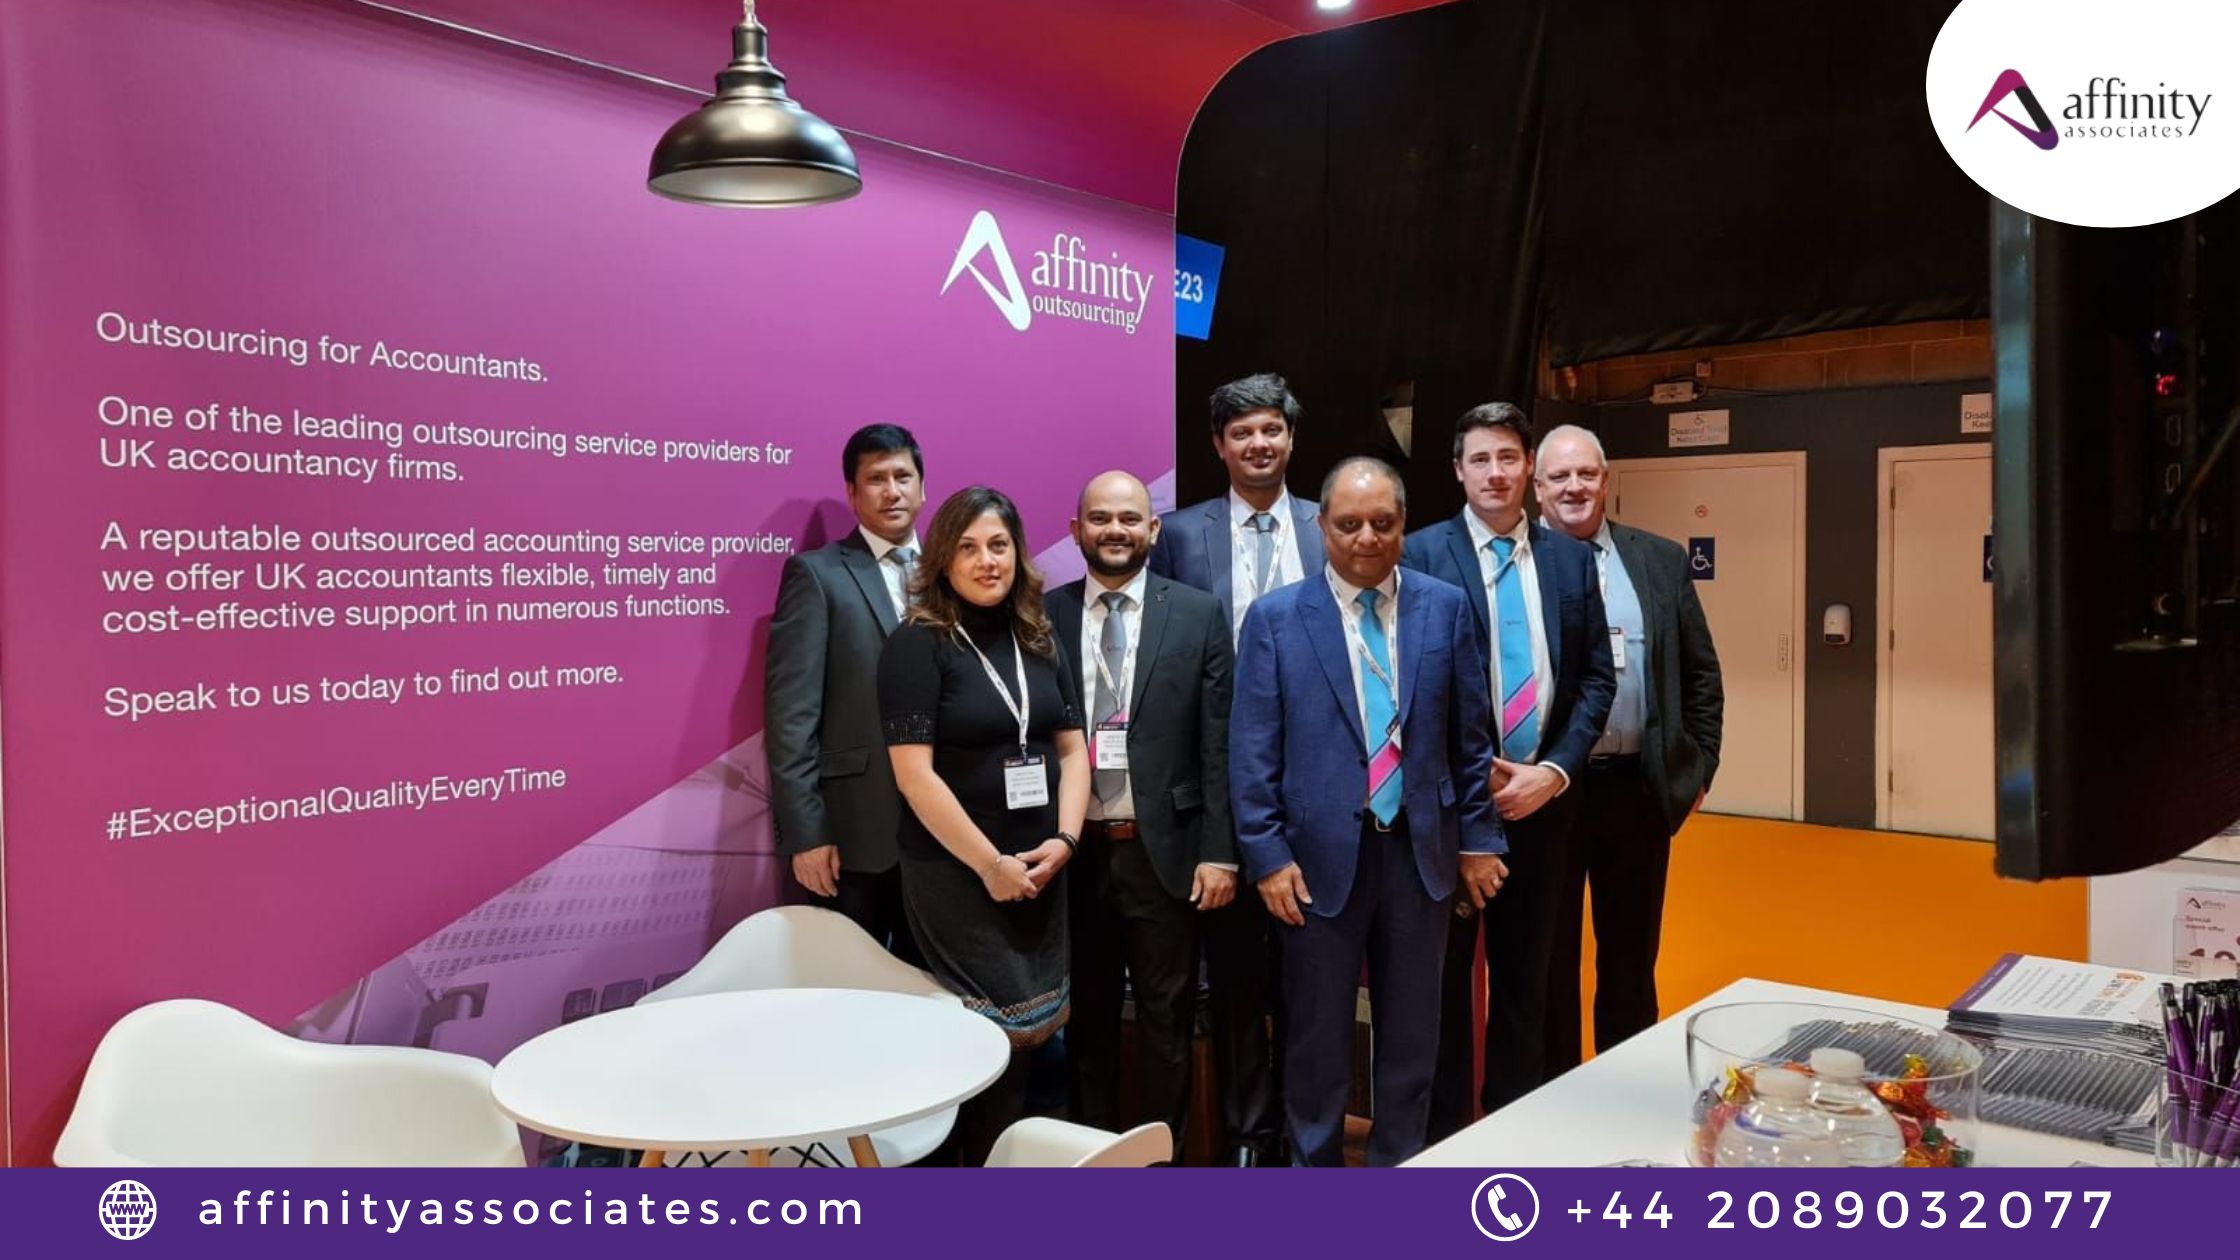 Affinity Associates at the Accountex London 2023 – Let’s Meet for Mutual Growth & Success